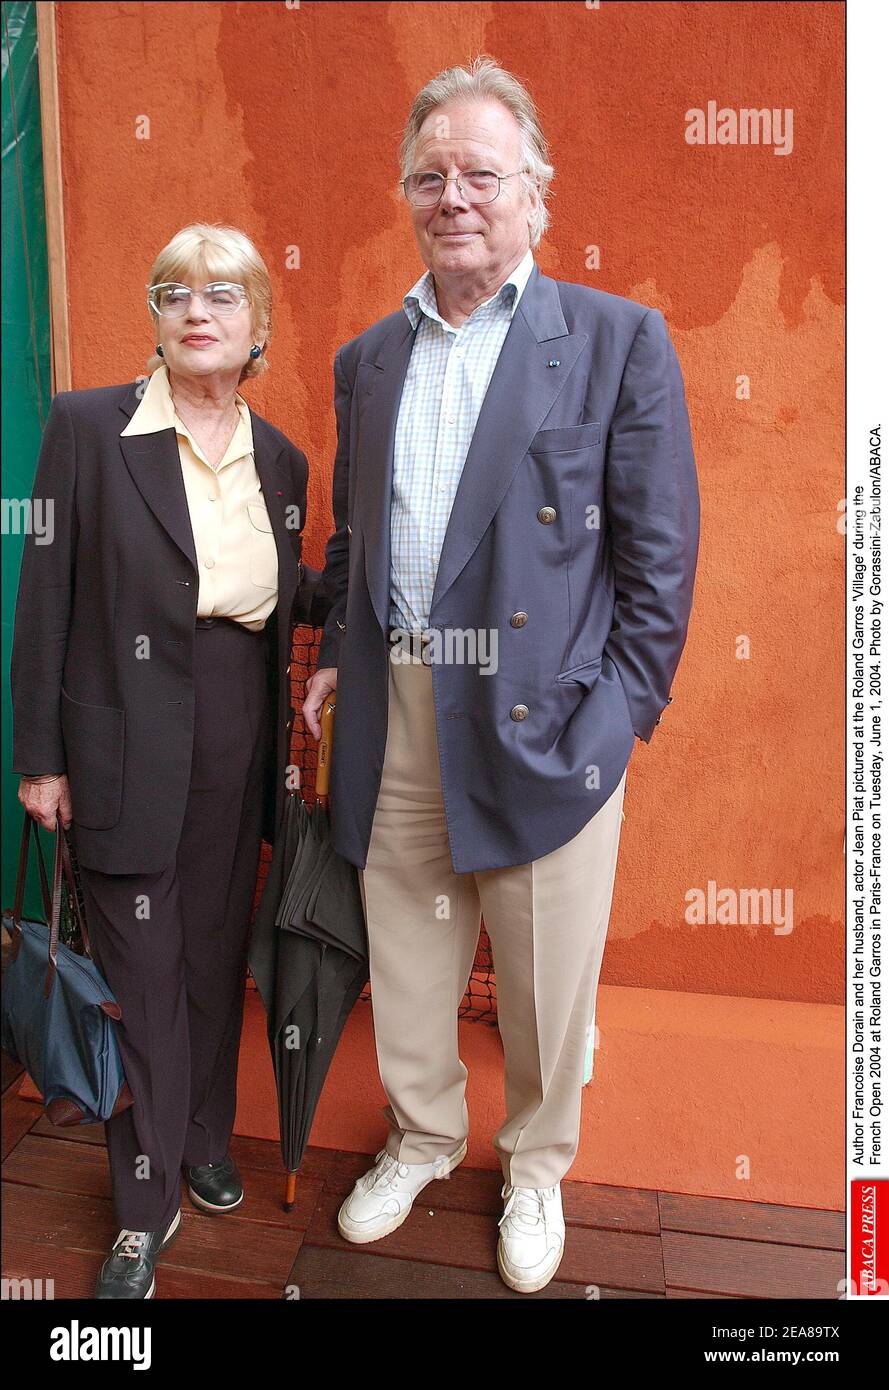 Jean Piat and his wife Francoise Dorin attending the premiere of the Kad  Merad's play 'Rendez Vous ' at the Theater of Paris in Paris, France on  September 27, 2010. Photo by